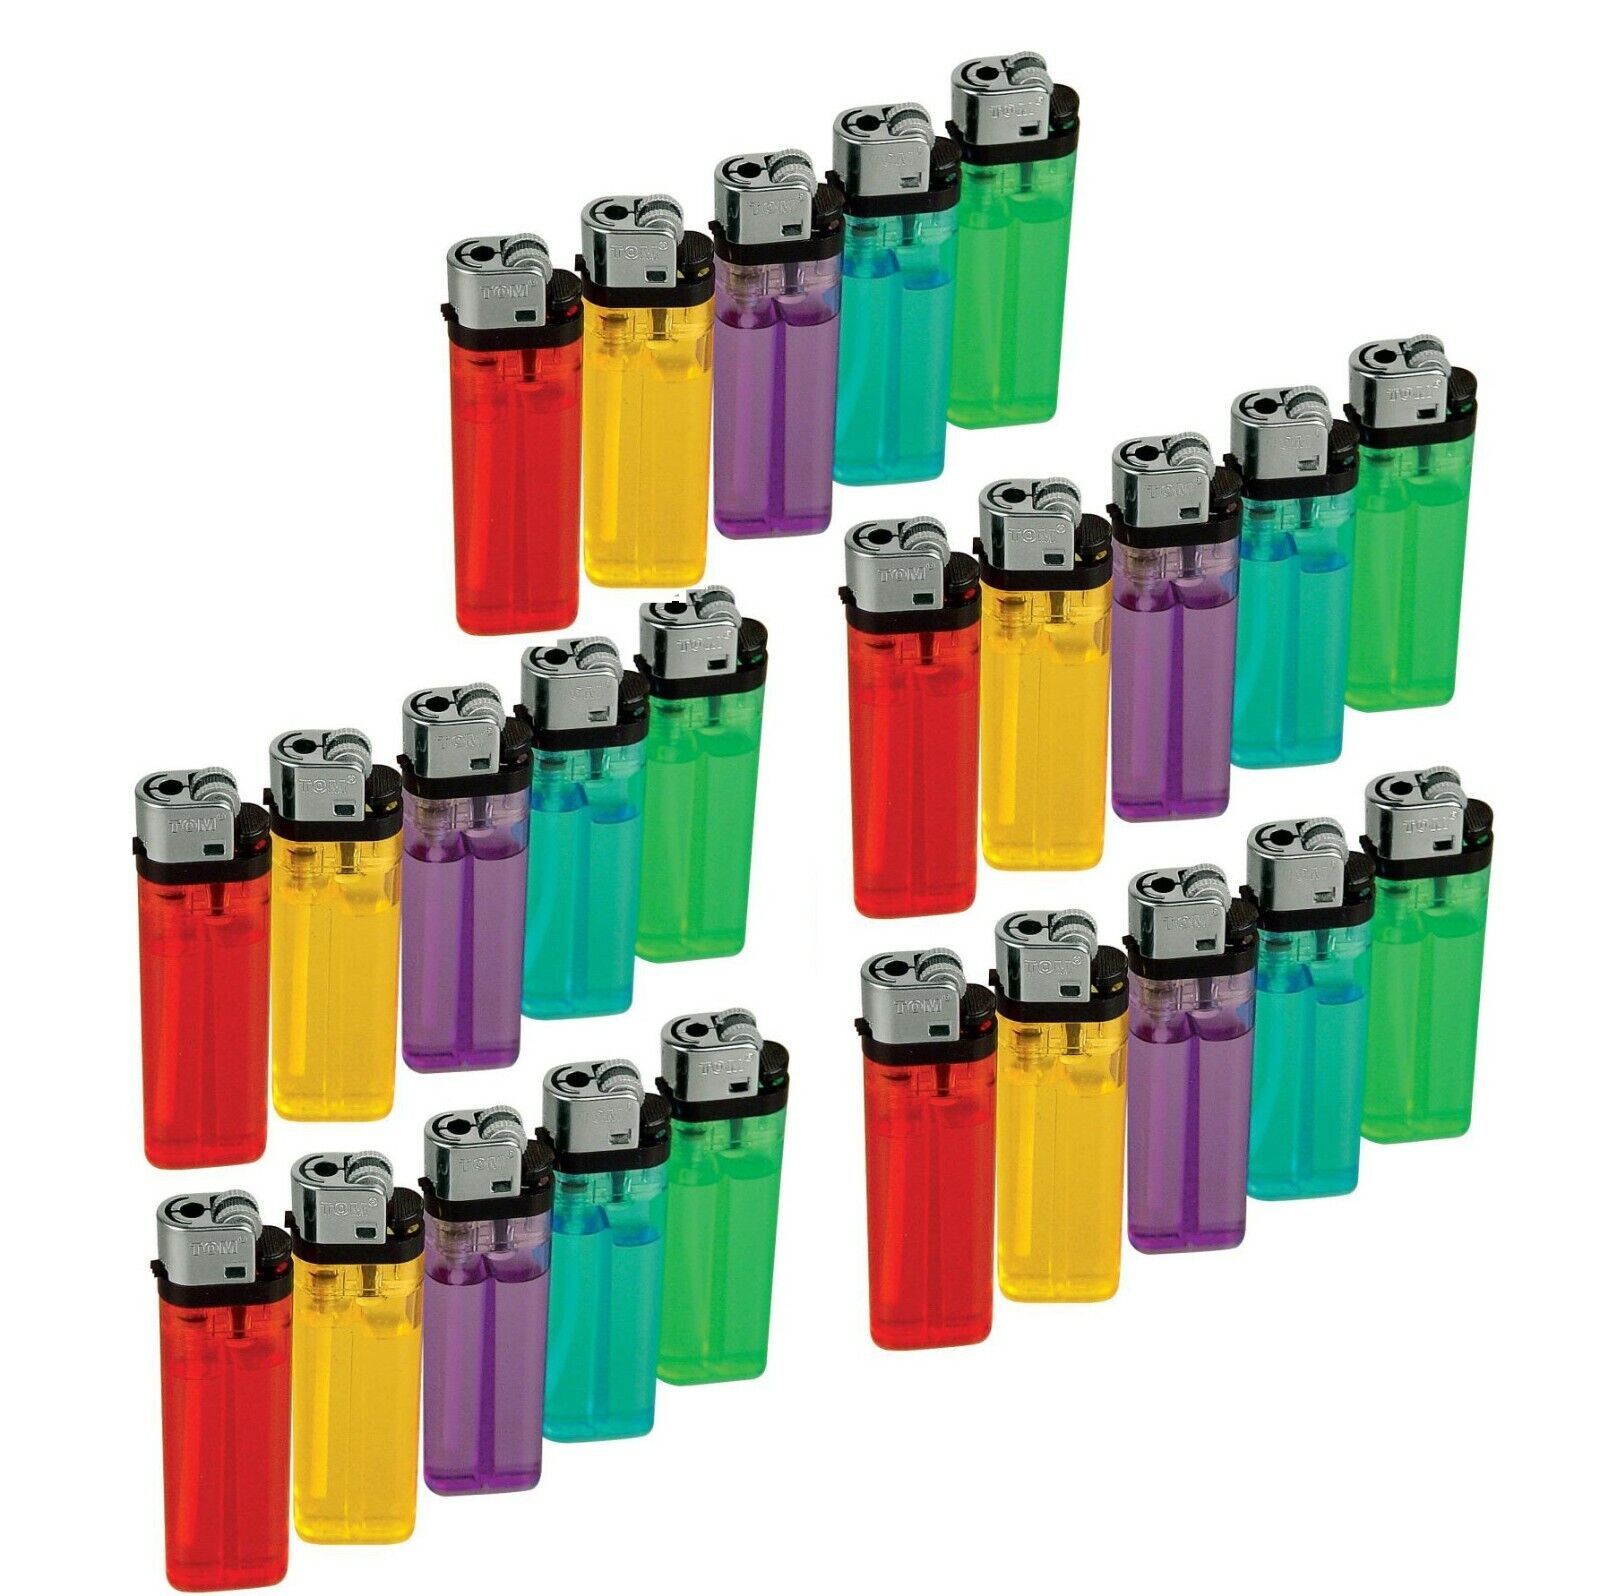 25 Pieces Cigarette Wholesale Disposable Lighters Pack with Display Stand